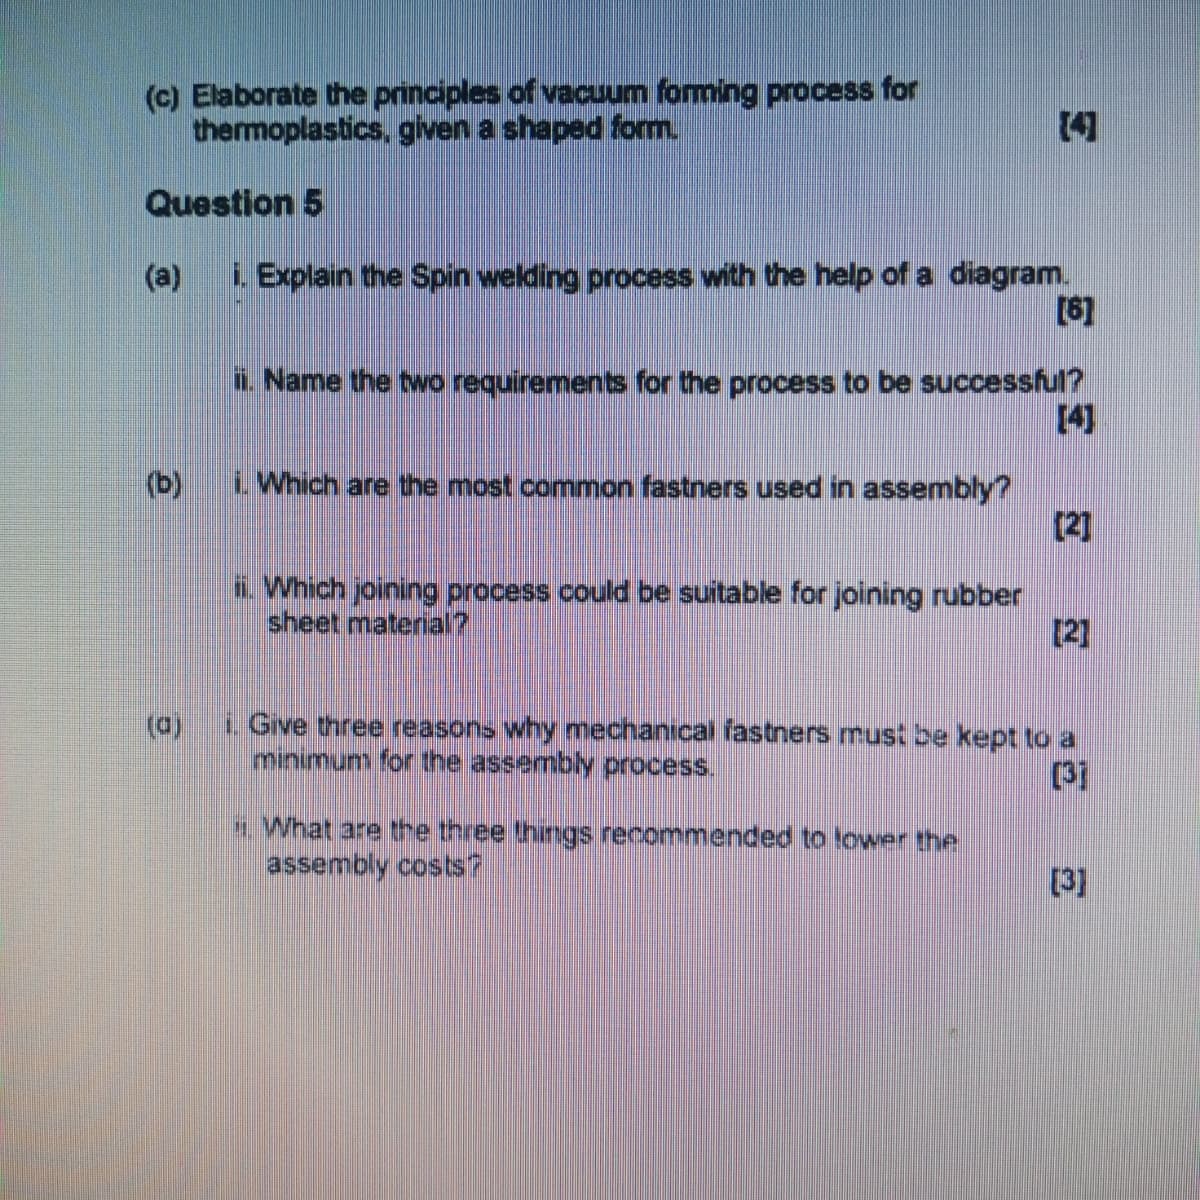 (c) Elaborate the principles of vacuum forming process for
thermoplastics, given a shaped form.
Question 5
[4]
(a)
i. Explain the Spin welding process with the help of a diagram.
[6]
ii. Name the two requirements for the process to be successful?
[4]
i. Which are the most common fastners used in assembly?
[2]
ii. Which joining process could be suitable for joining rubber
sheet material?
[2]
(0)
i. Give three reasons why mechanical fastners must be kept to a
minimum for the assembly process.
[37
What are the three things recommended to lower the
assembly costs?
[3]